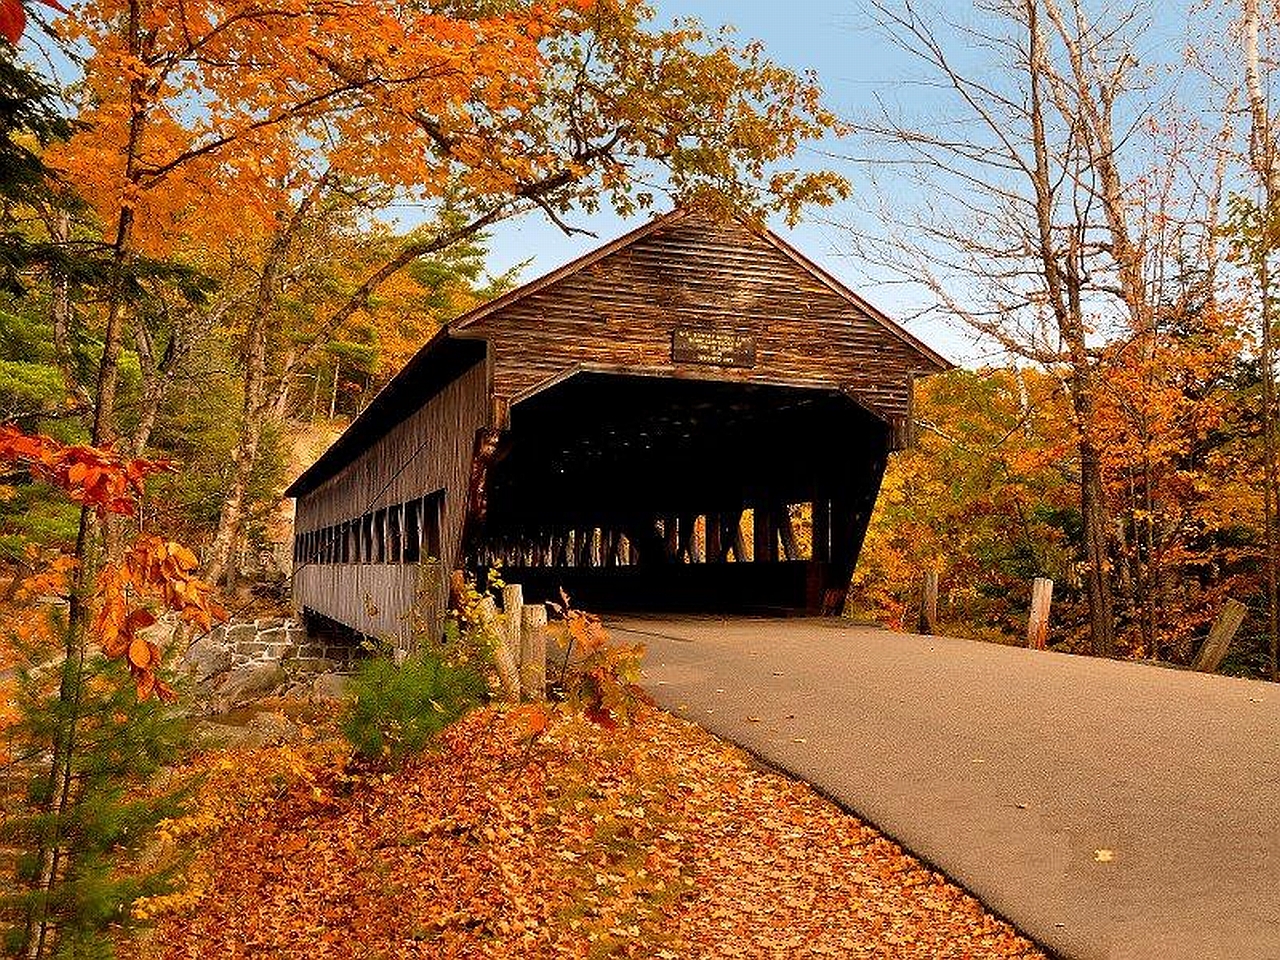 Covered Bridge in Autumn - Image Abyss